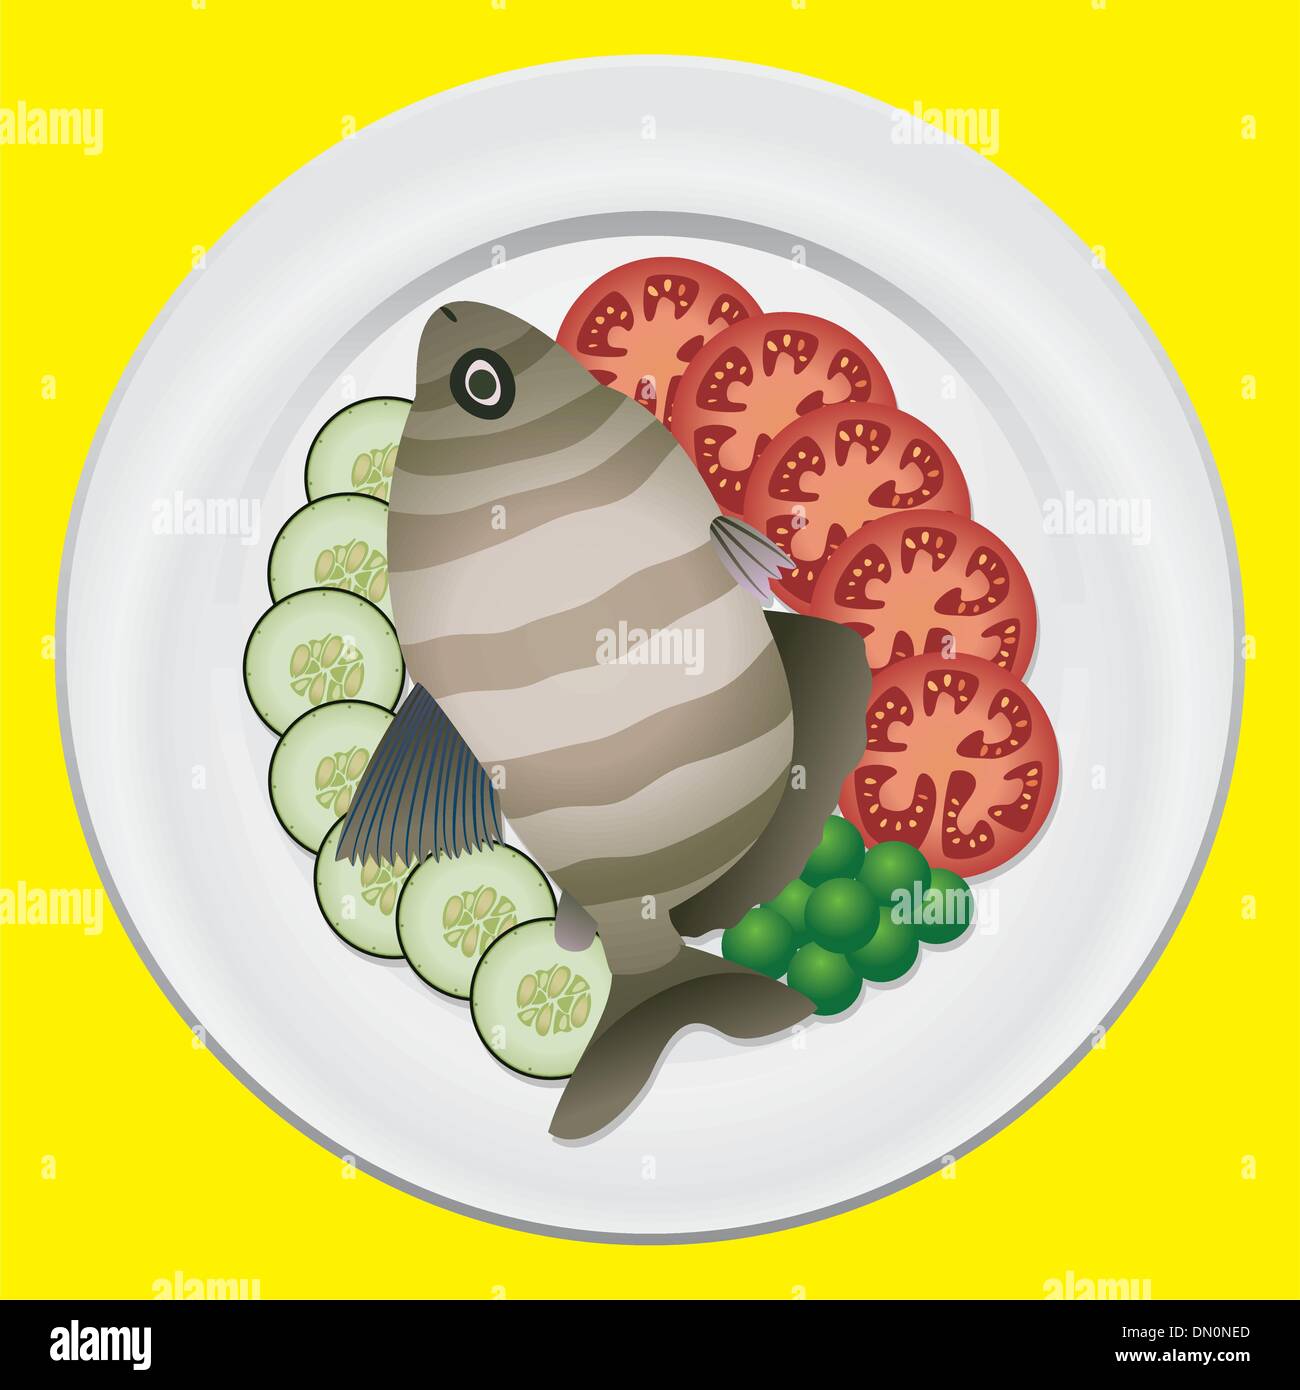 Fish illustration plate Stock Vector Images - Alamy